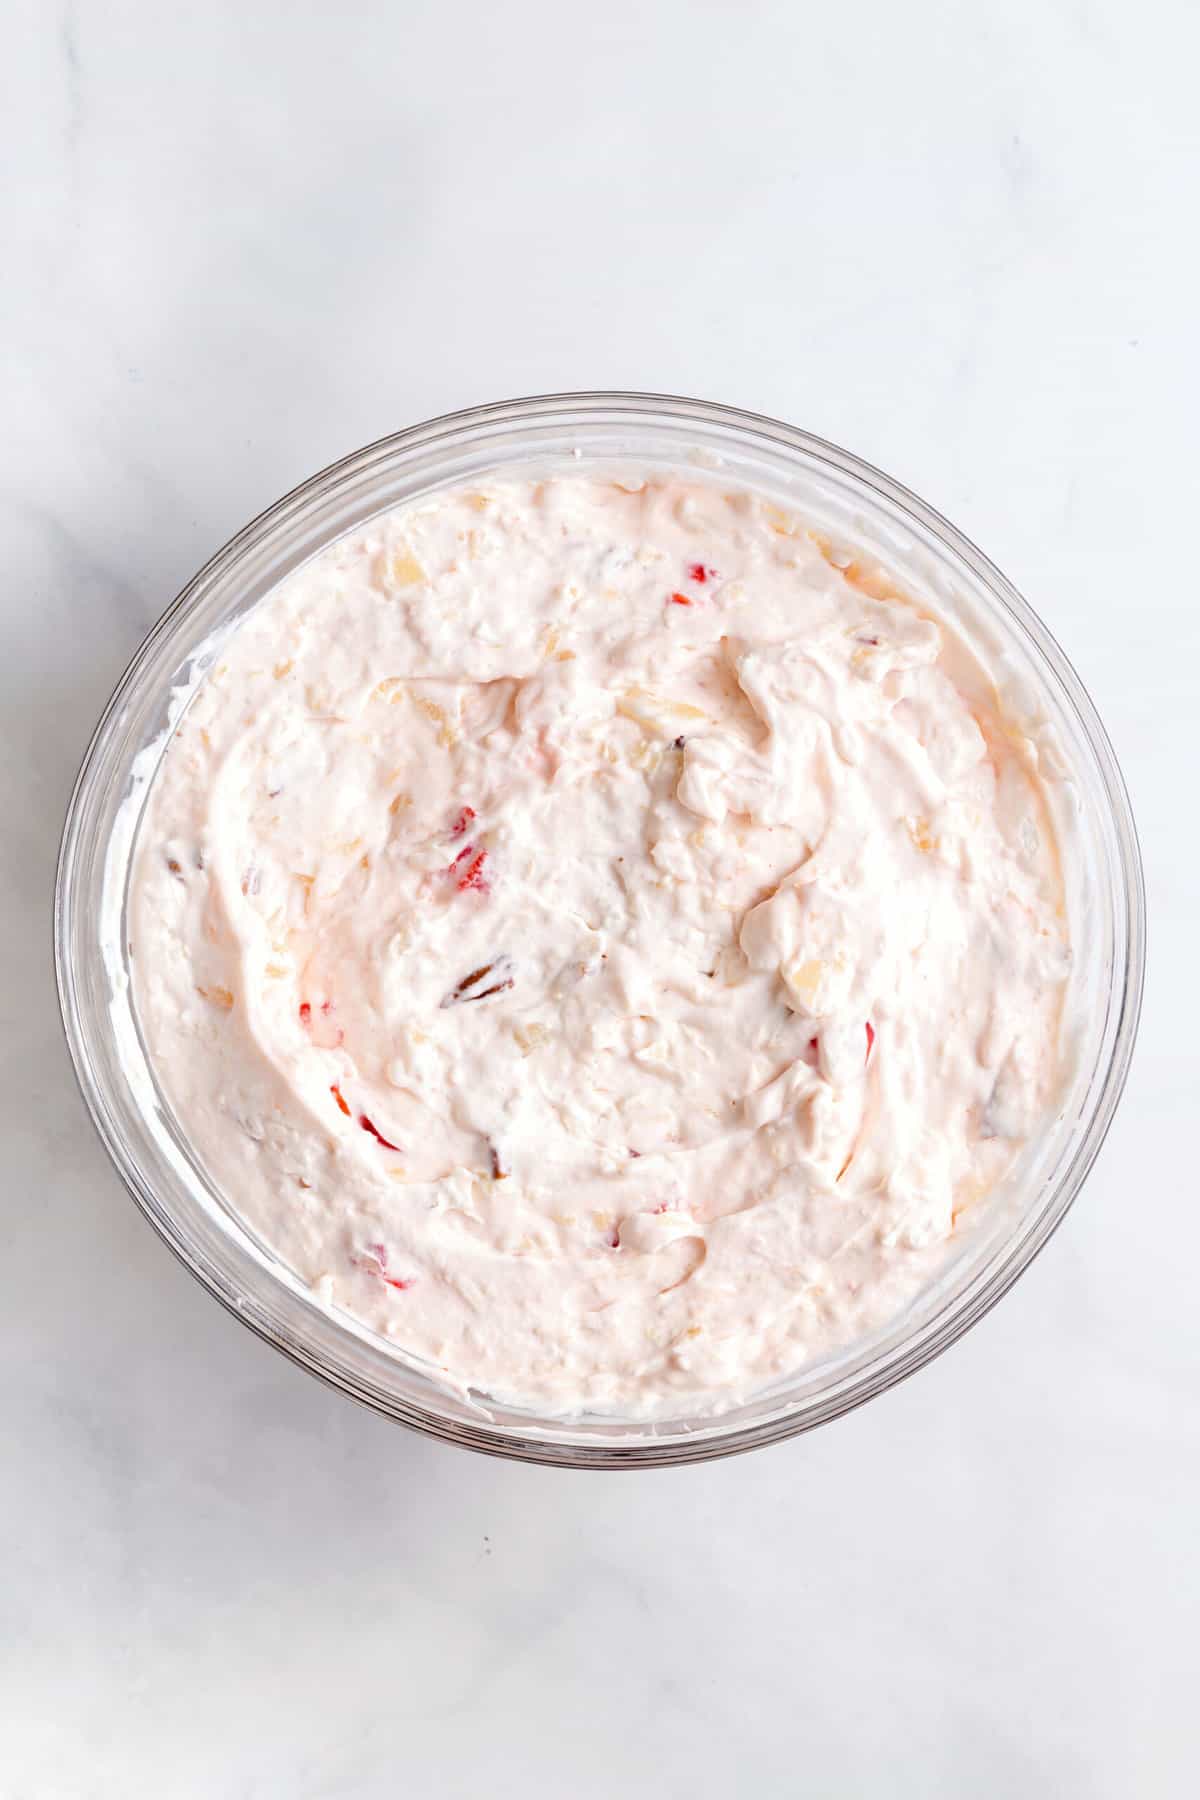 cool whip, cream cheese, condensed milk and chopped cherries, pecans and shredded coconut mixed together in a large glass bowl